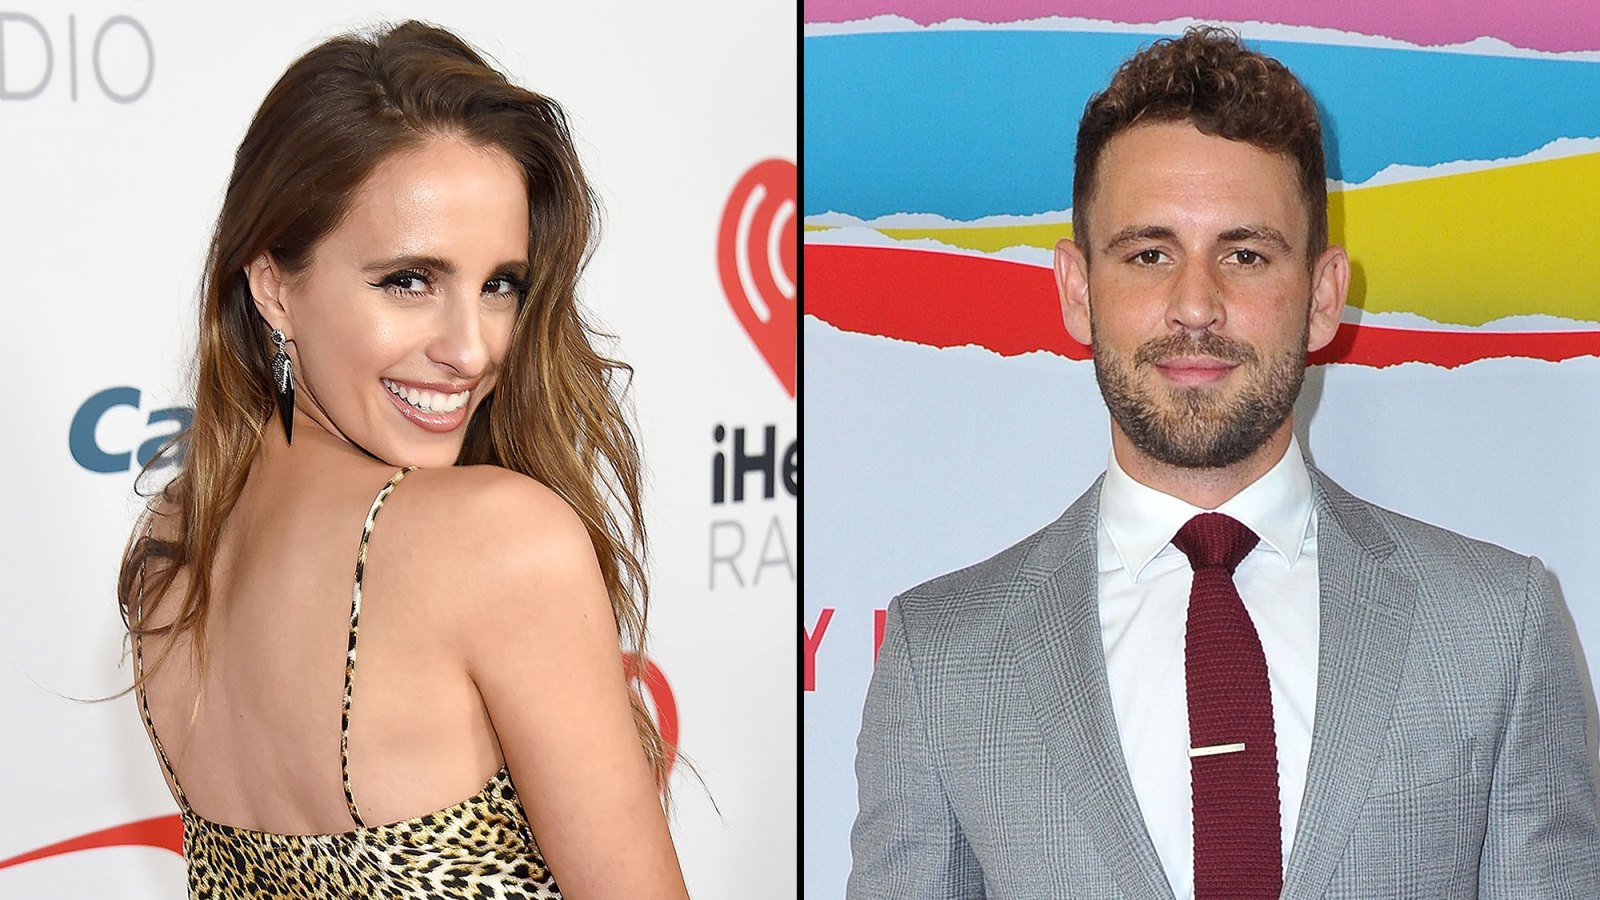 Vanessa Grimaldi Is Dating Josh Wolfe More Than a Year After Nick Viall Split